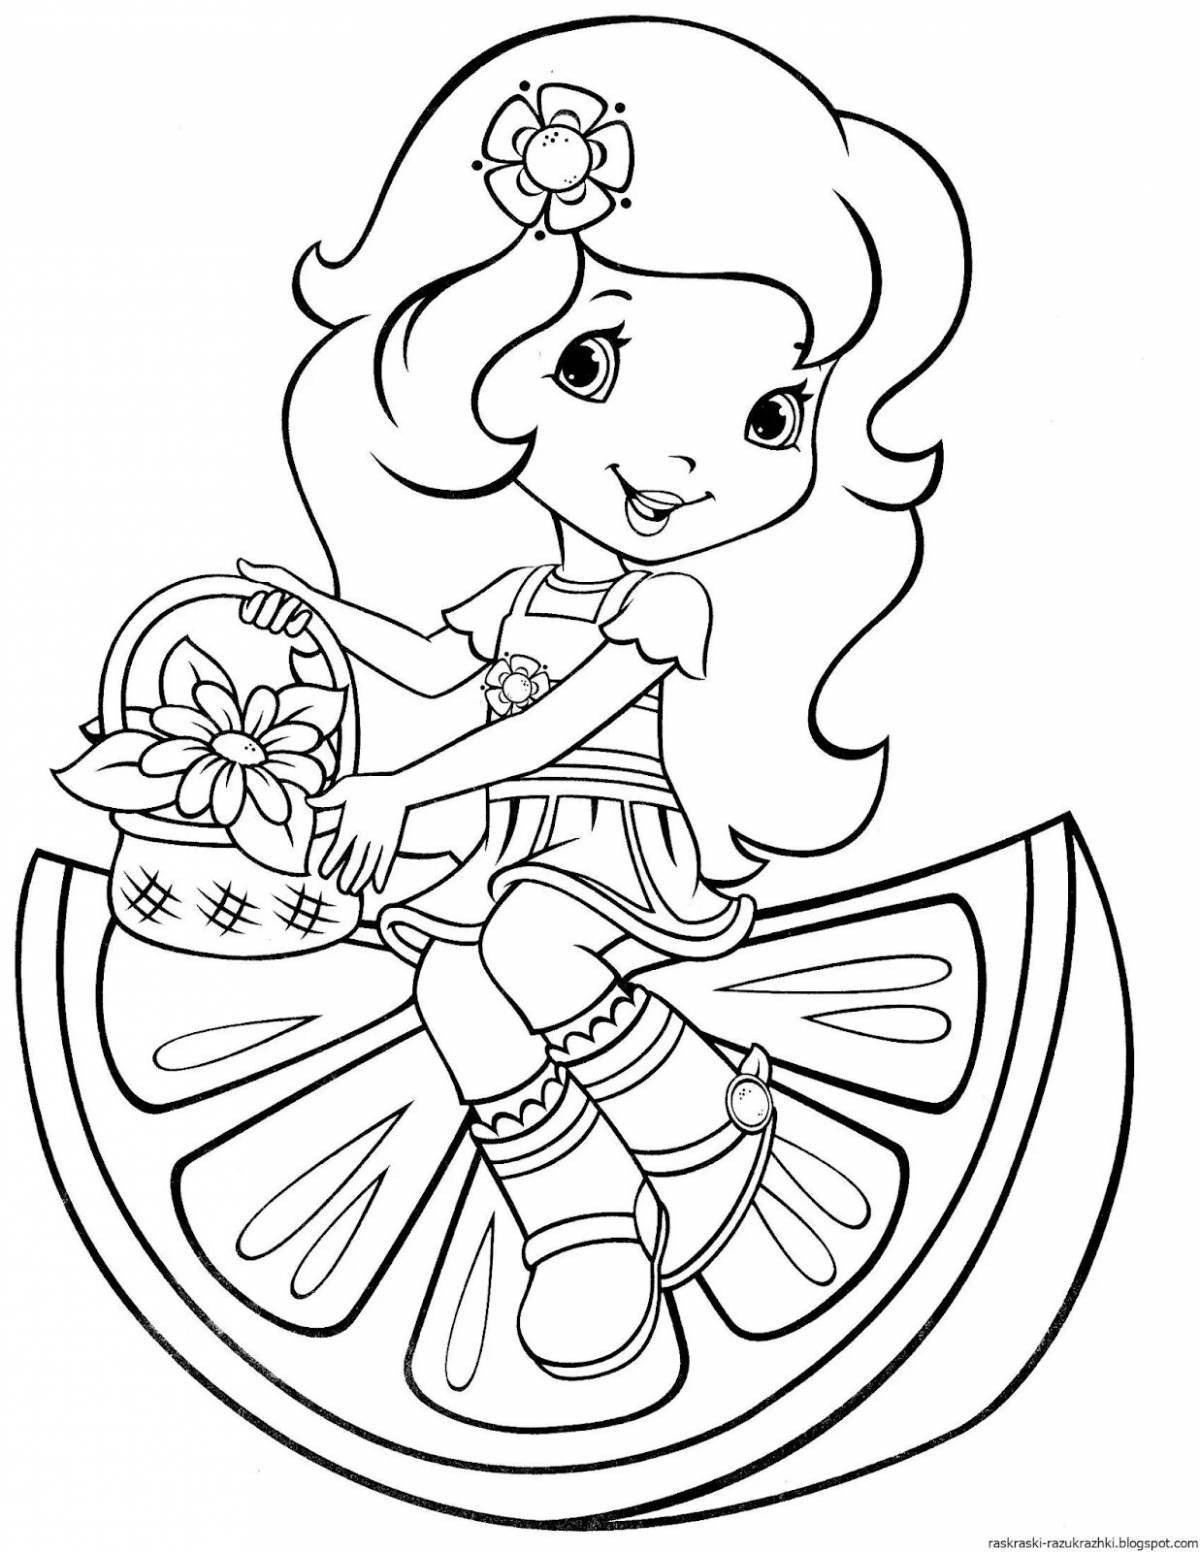 Color-frenzy coloring page for 6 year old girls